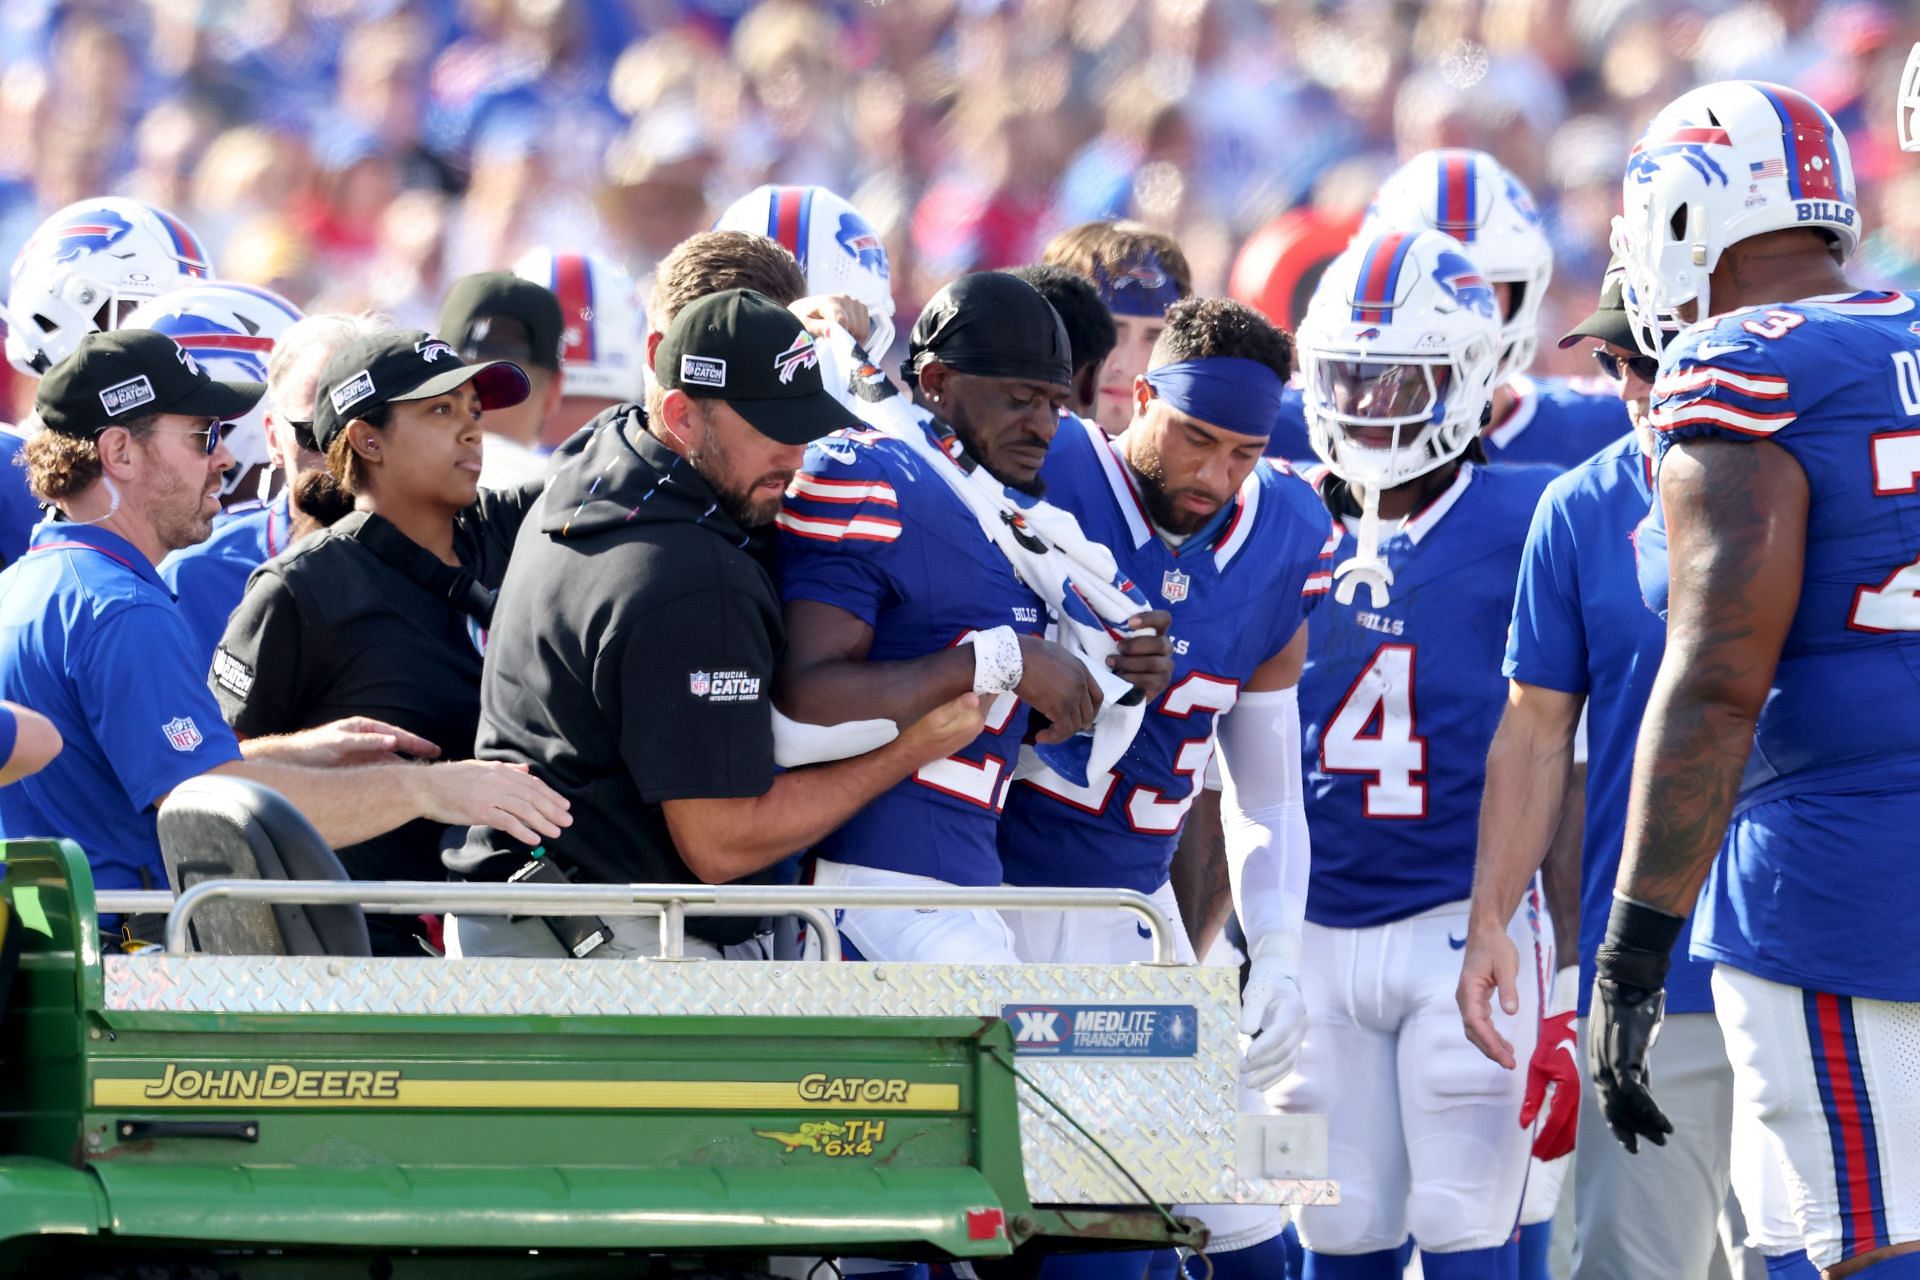 NFL Injury Report 2023: What NFL players are injured right now and